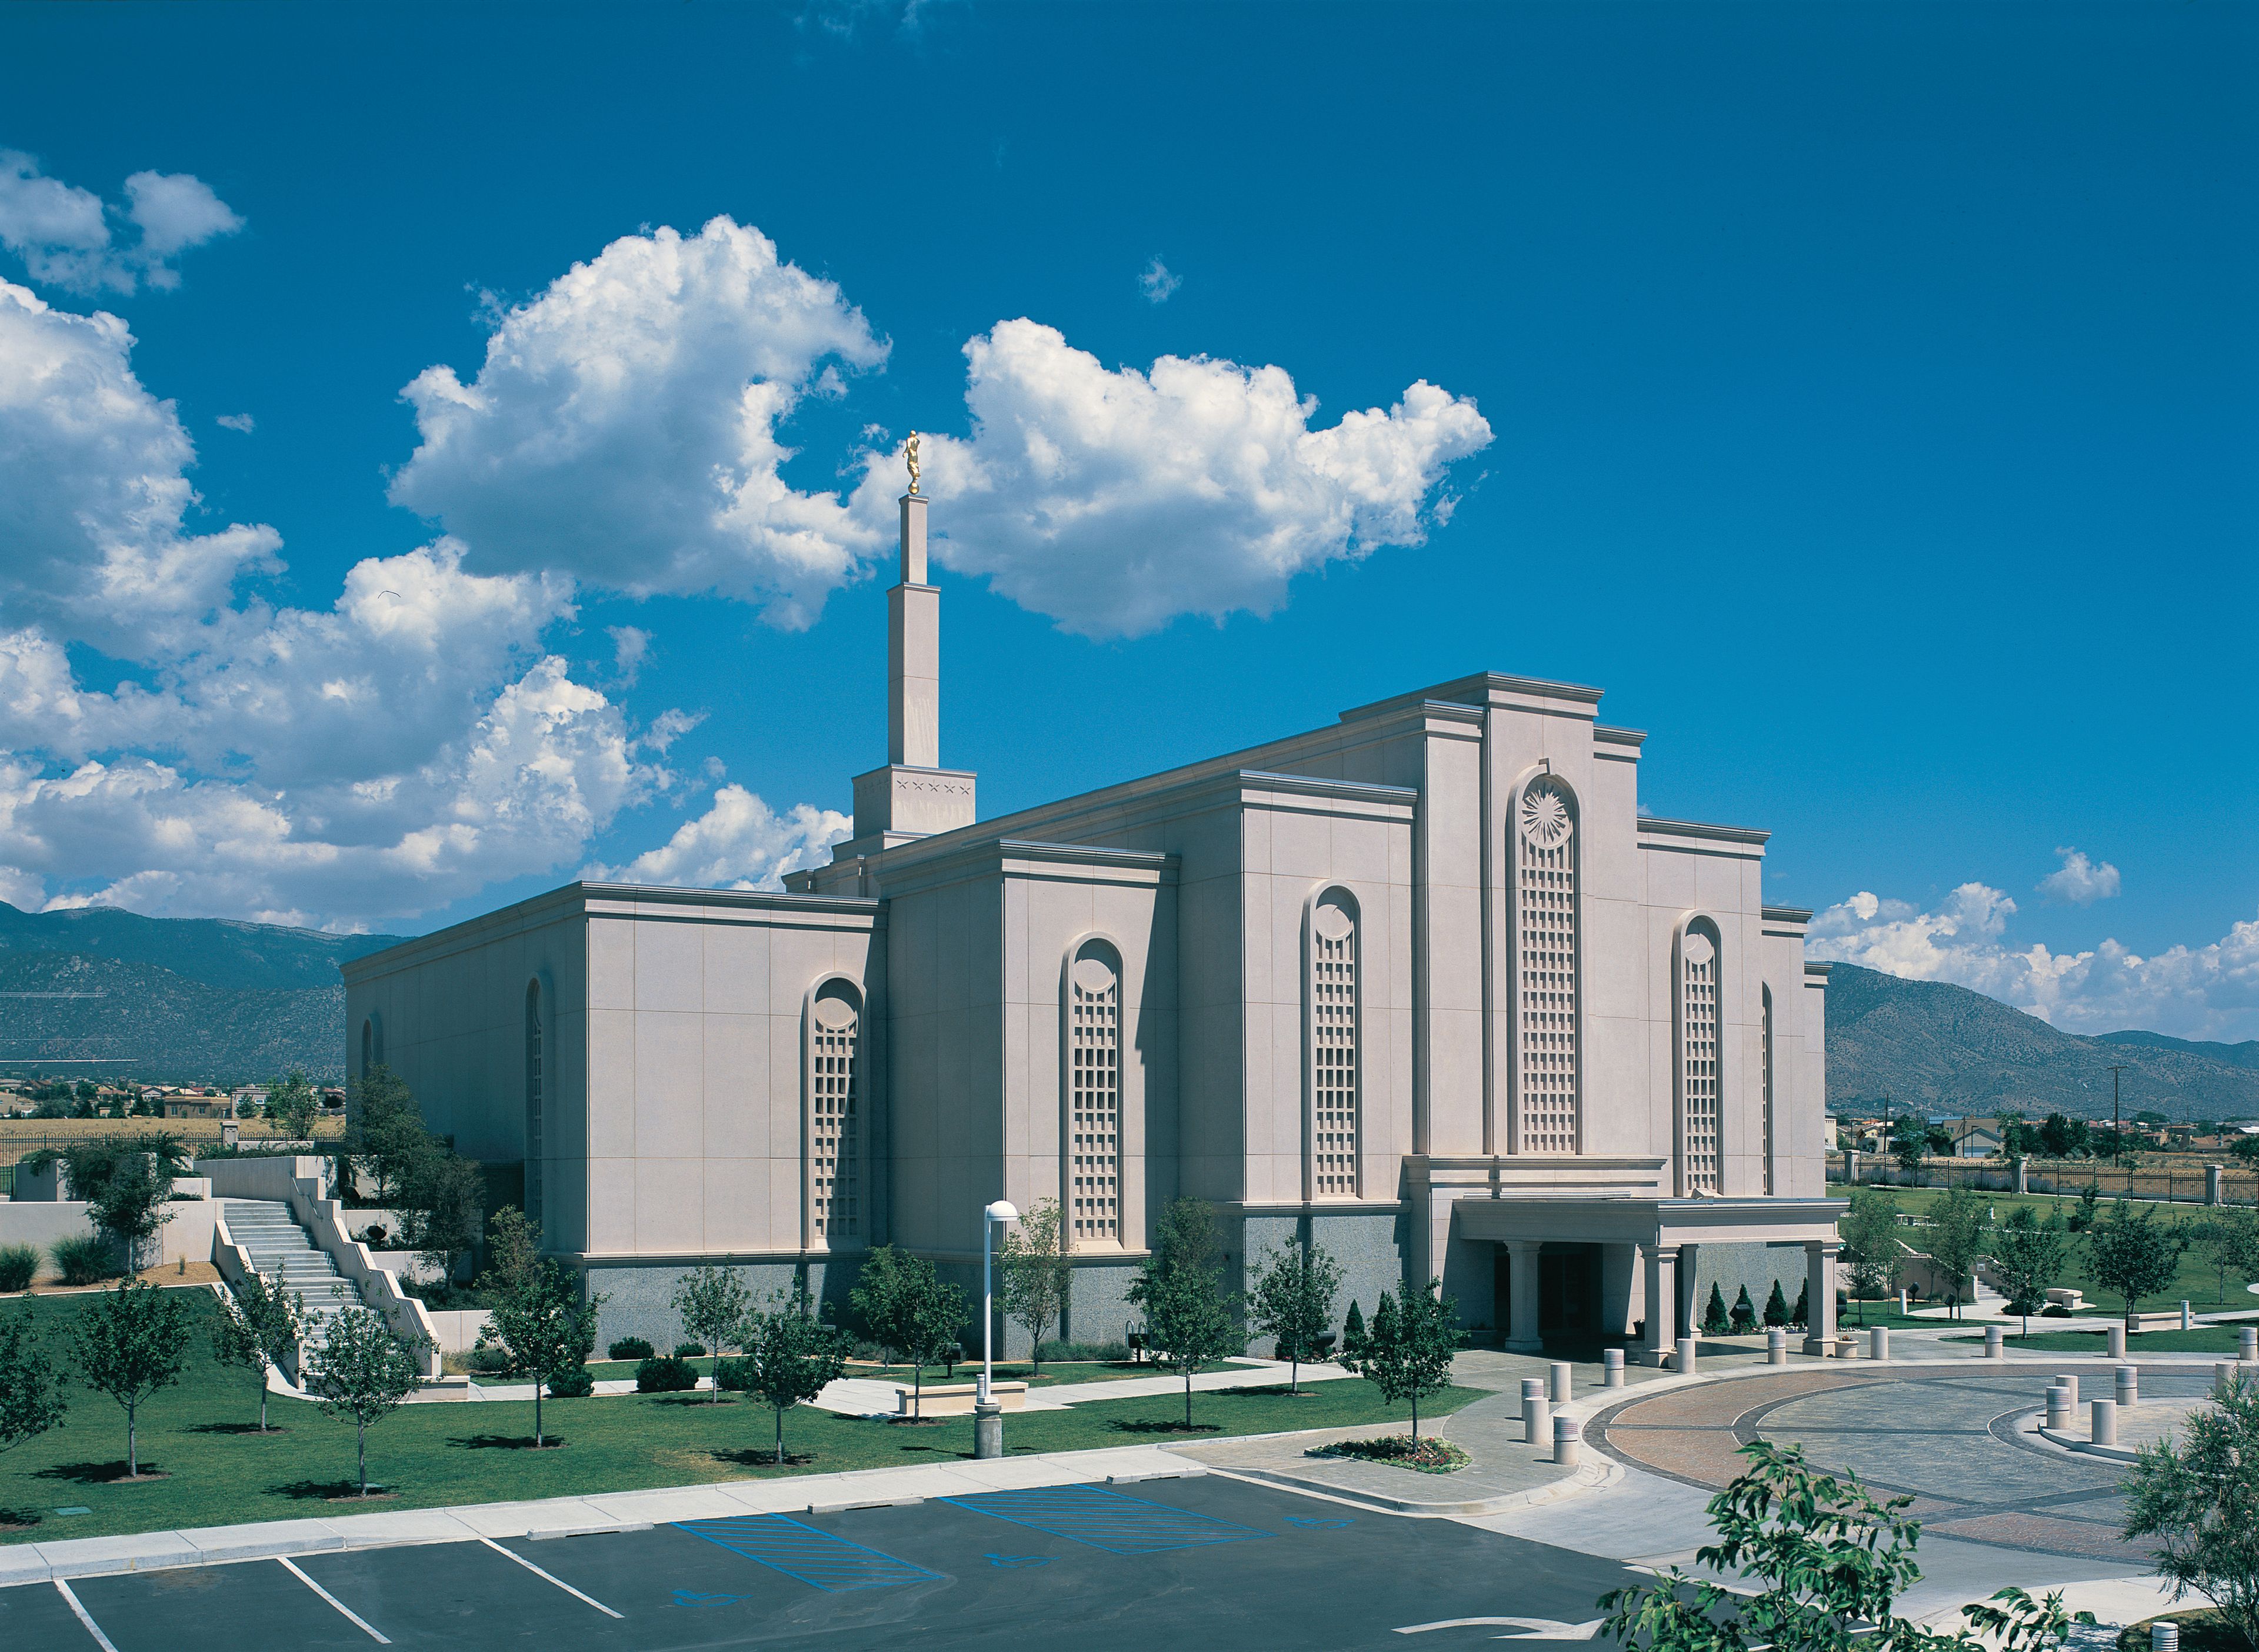 The front of the Albuquerque New Mexico Temple in the daytime.